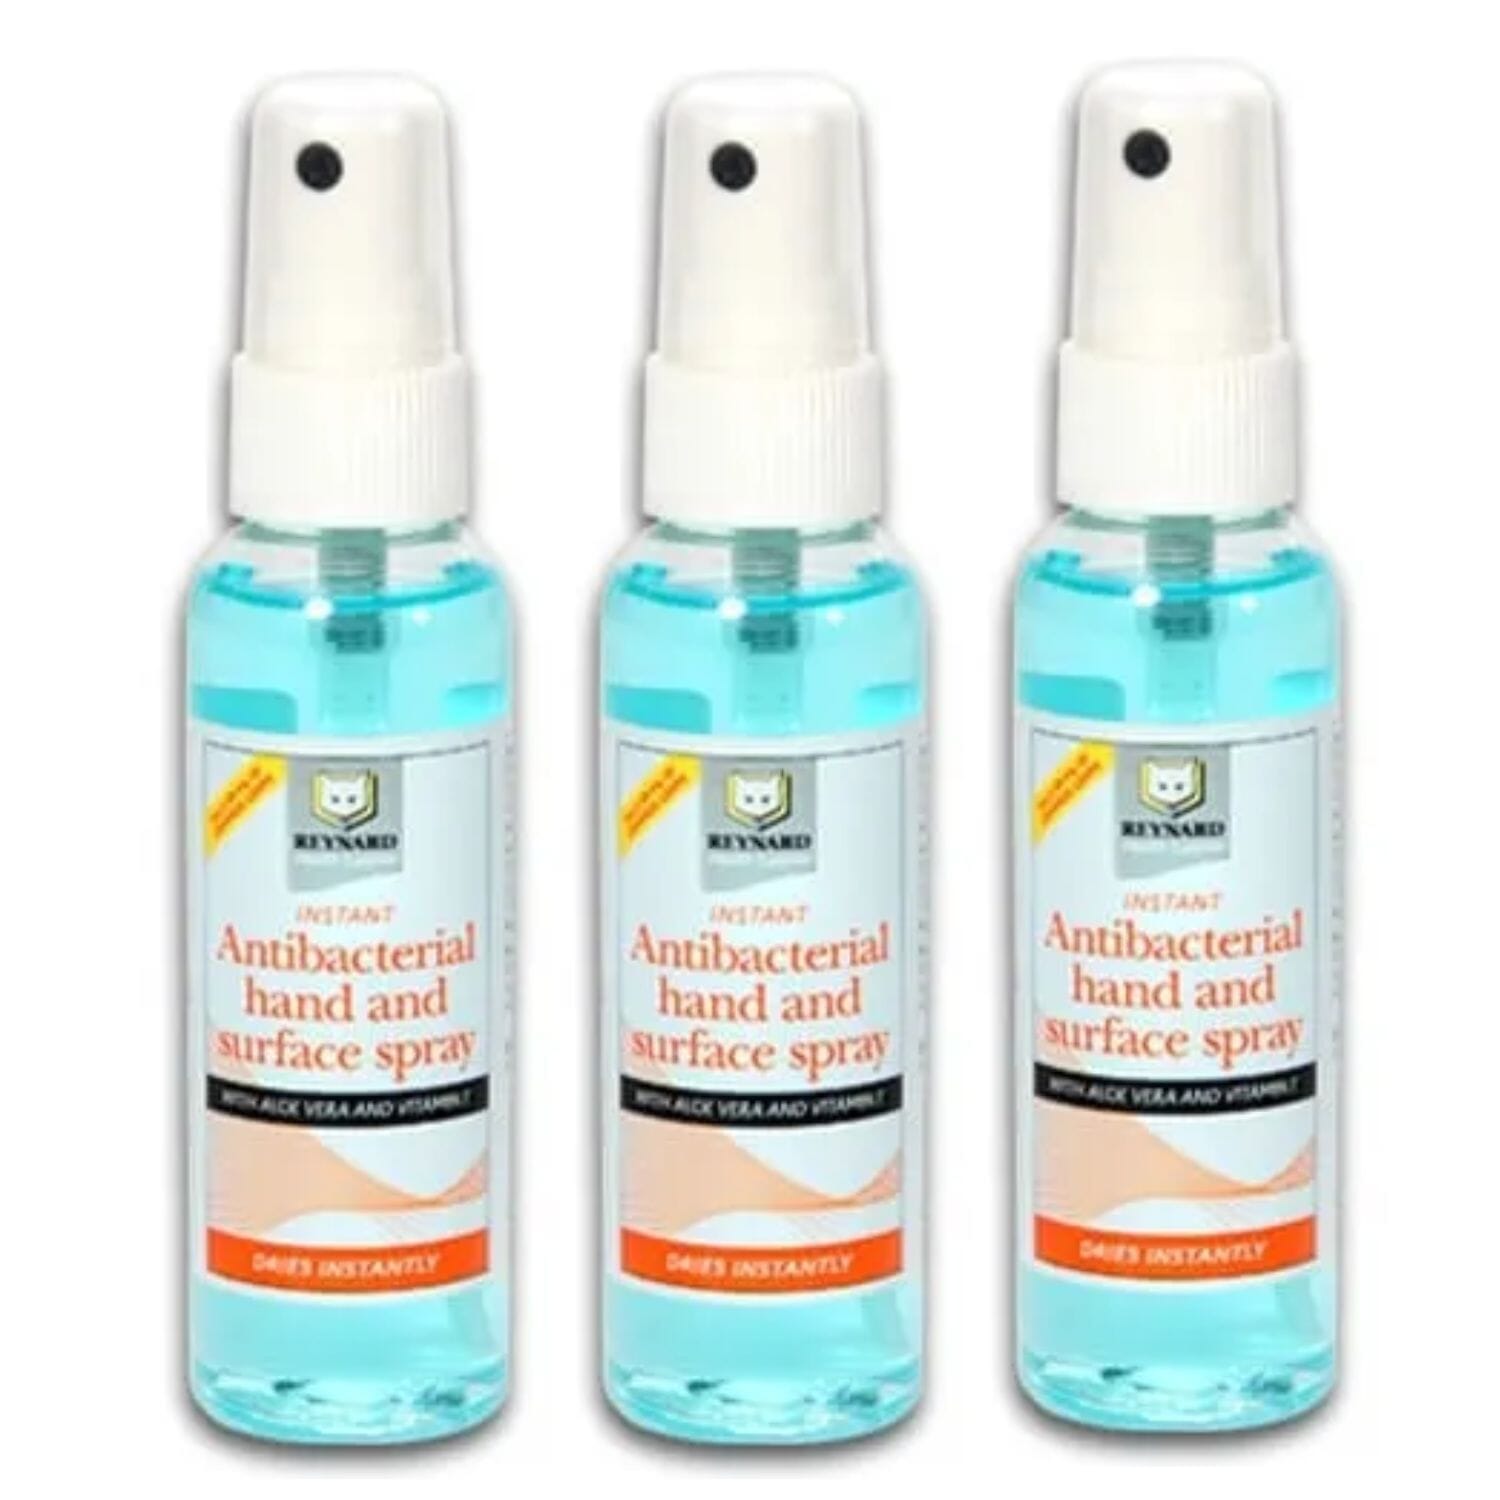 View Sanitising Hand and Surface Spray Pack of 3 information